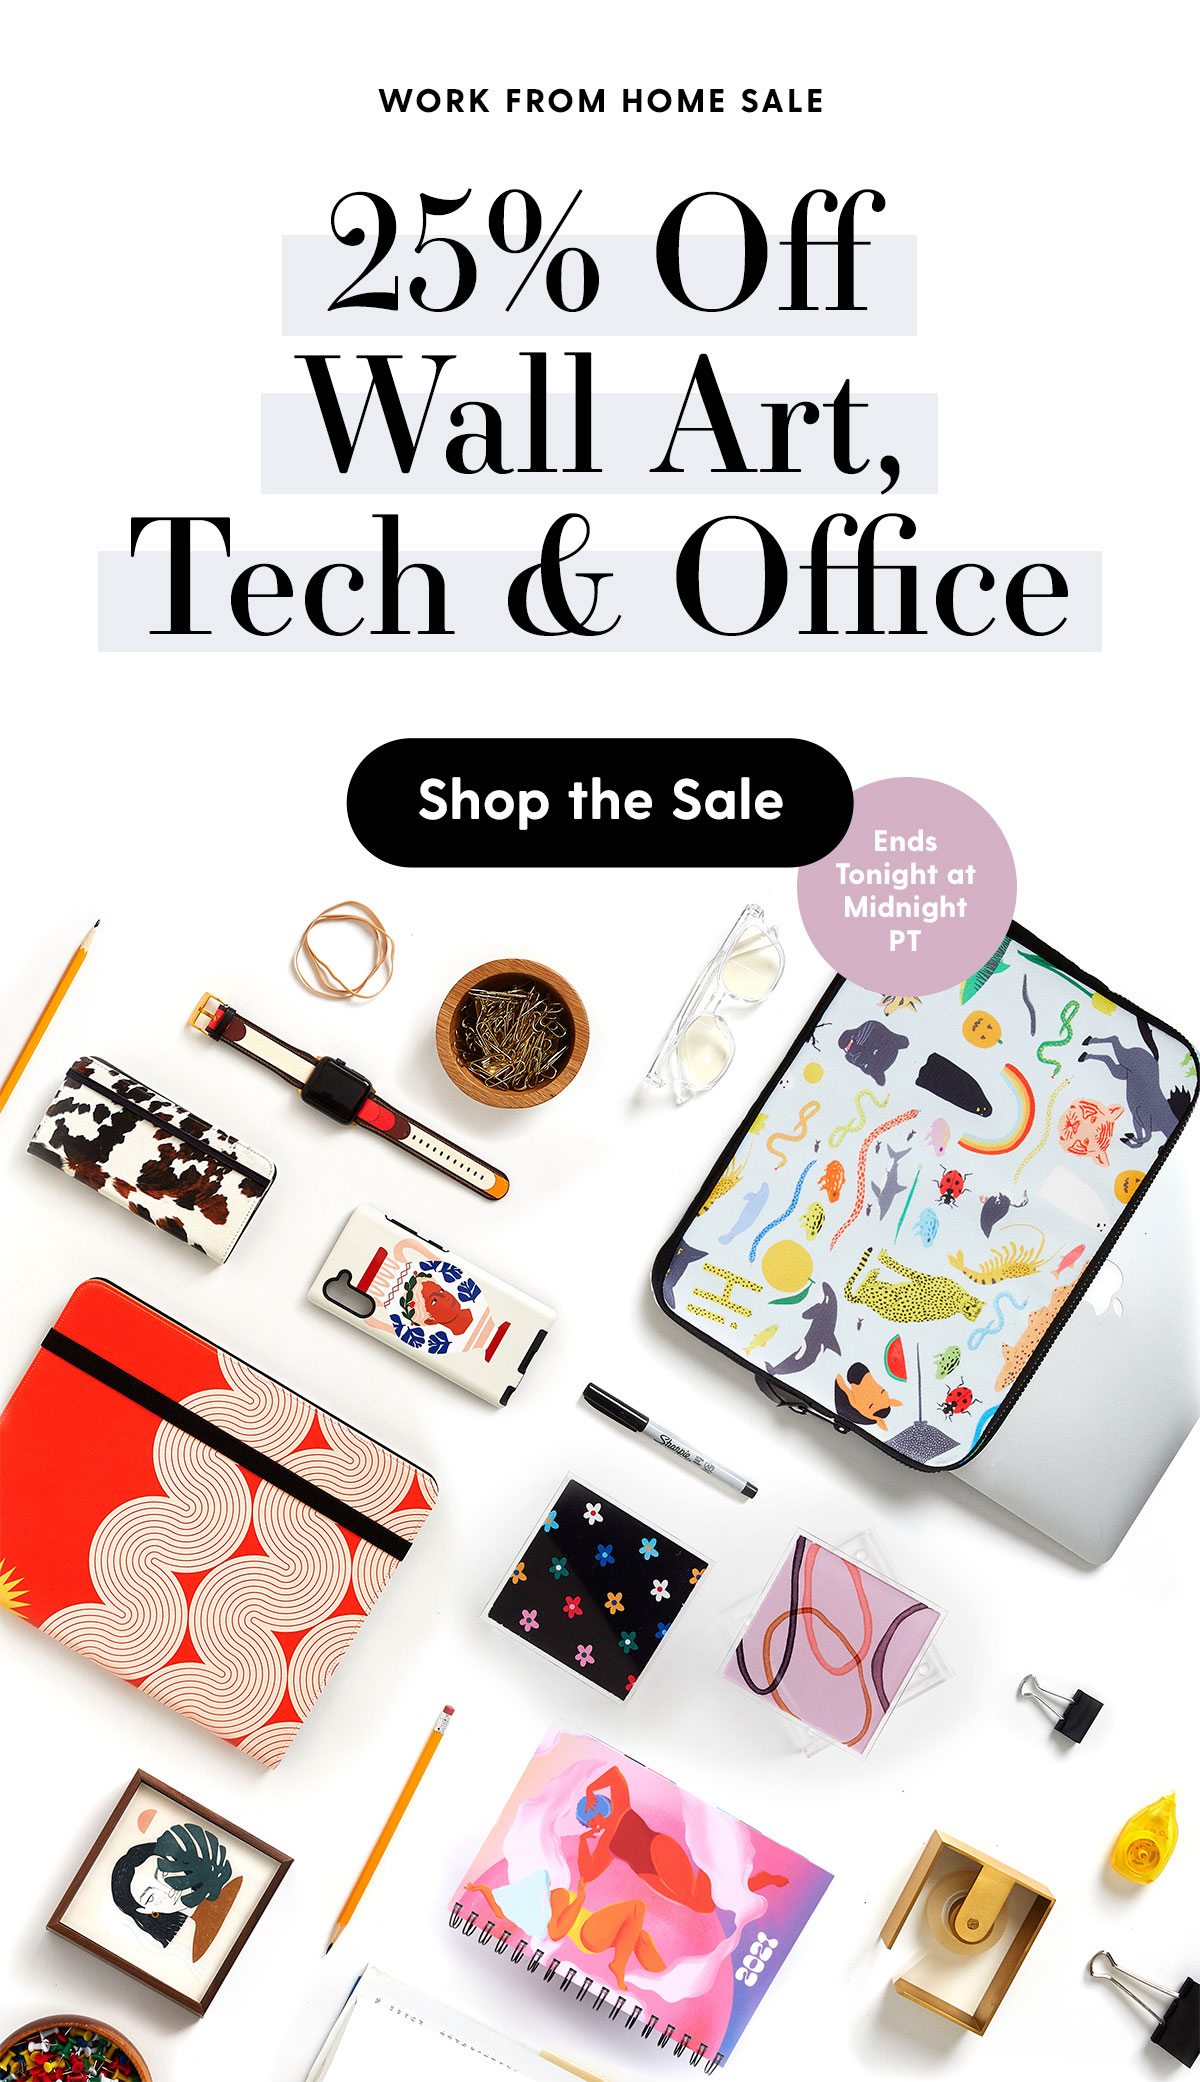 Work from Home Sale 25% Off Wall Art, Tech & Office Shop the Sale